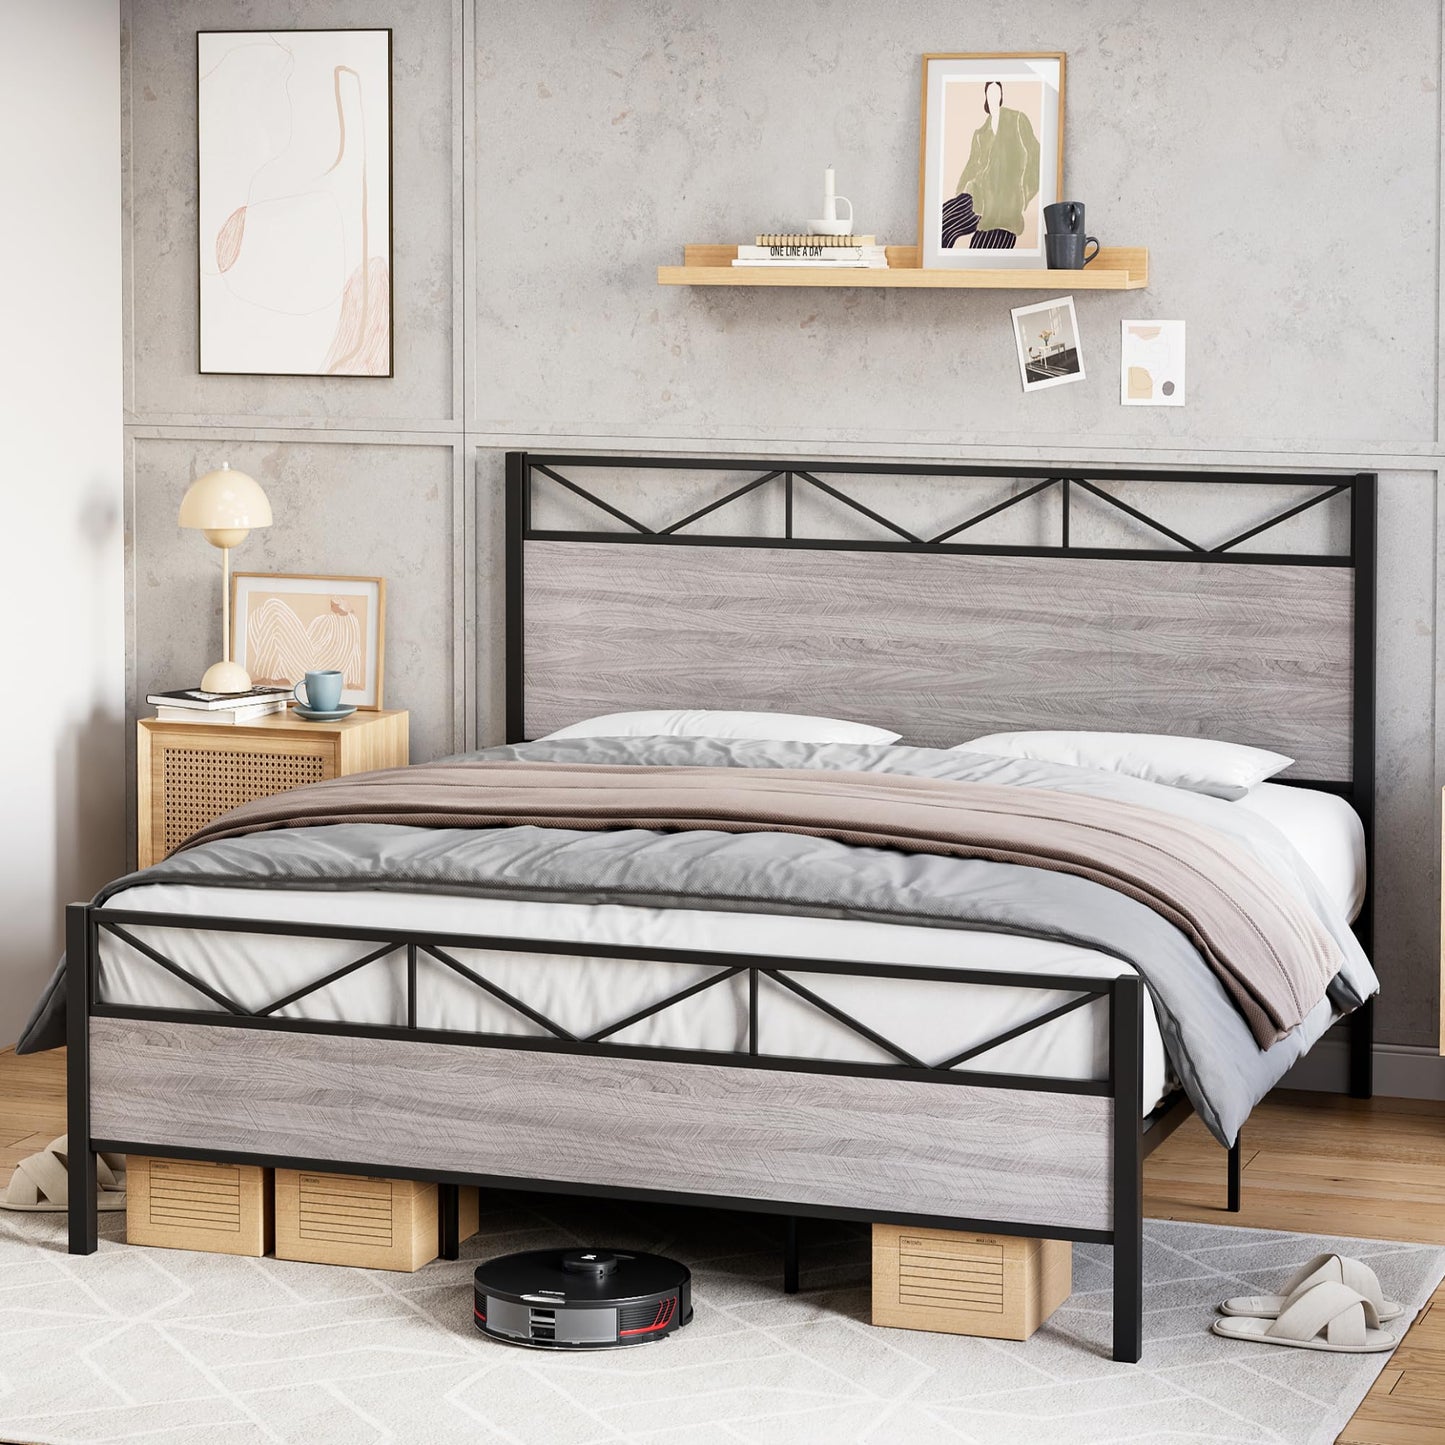 Senfot Queen Bed Frame with Rustic Wood Headboard and Footboard, Metal Platform Bed Frame Queen Heavy Duty, Sturdy Steel Slat Support, No Box Spring Needed, Grey